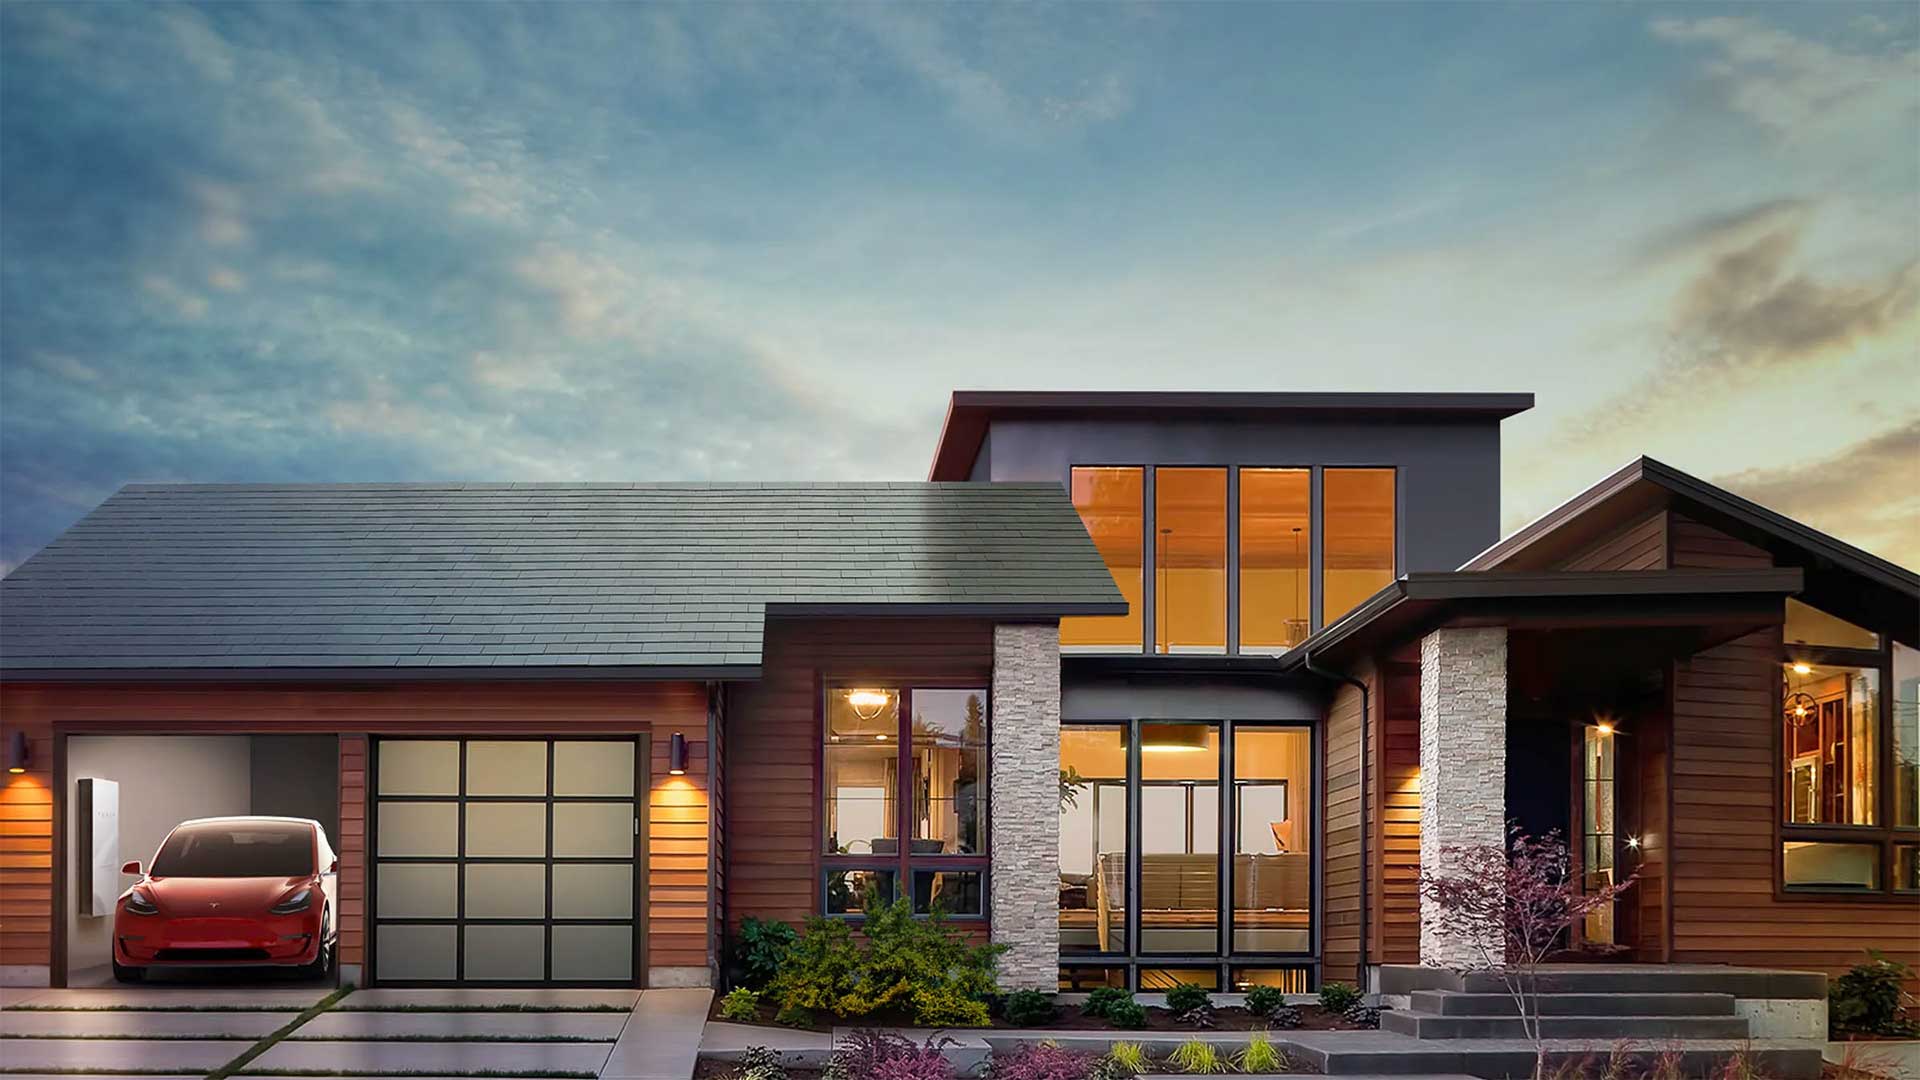 Can Tesla's SolarRoof Really Save the World?